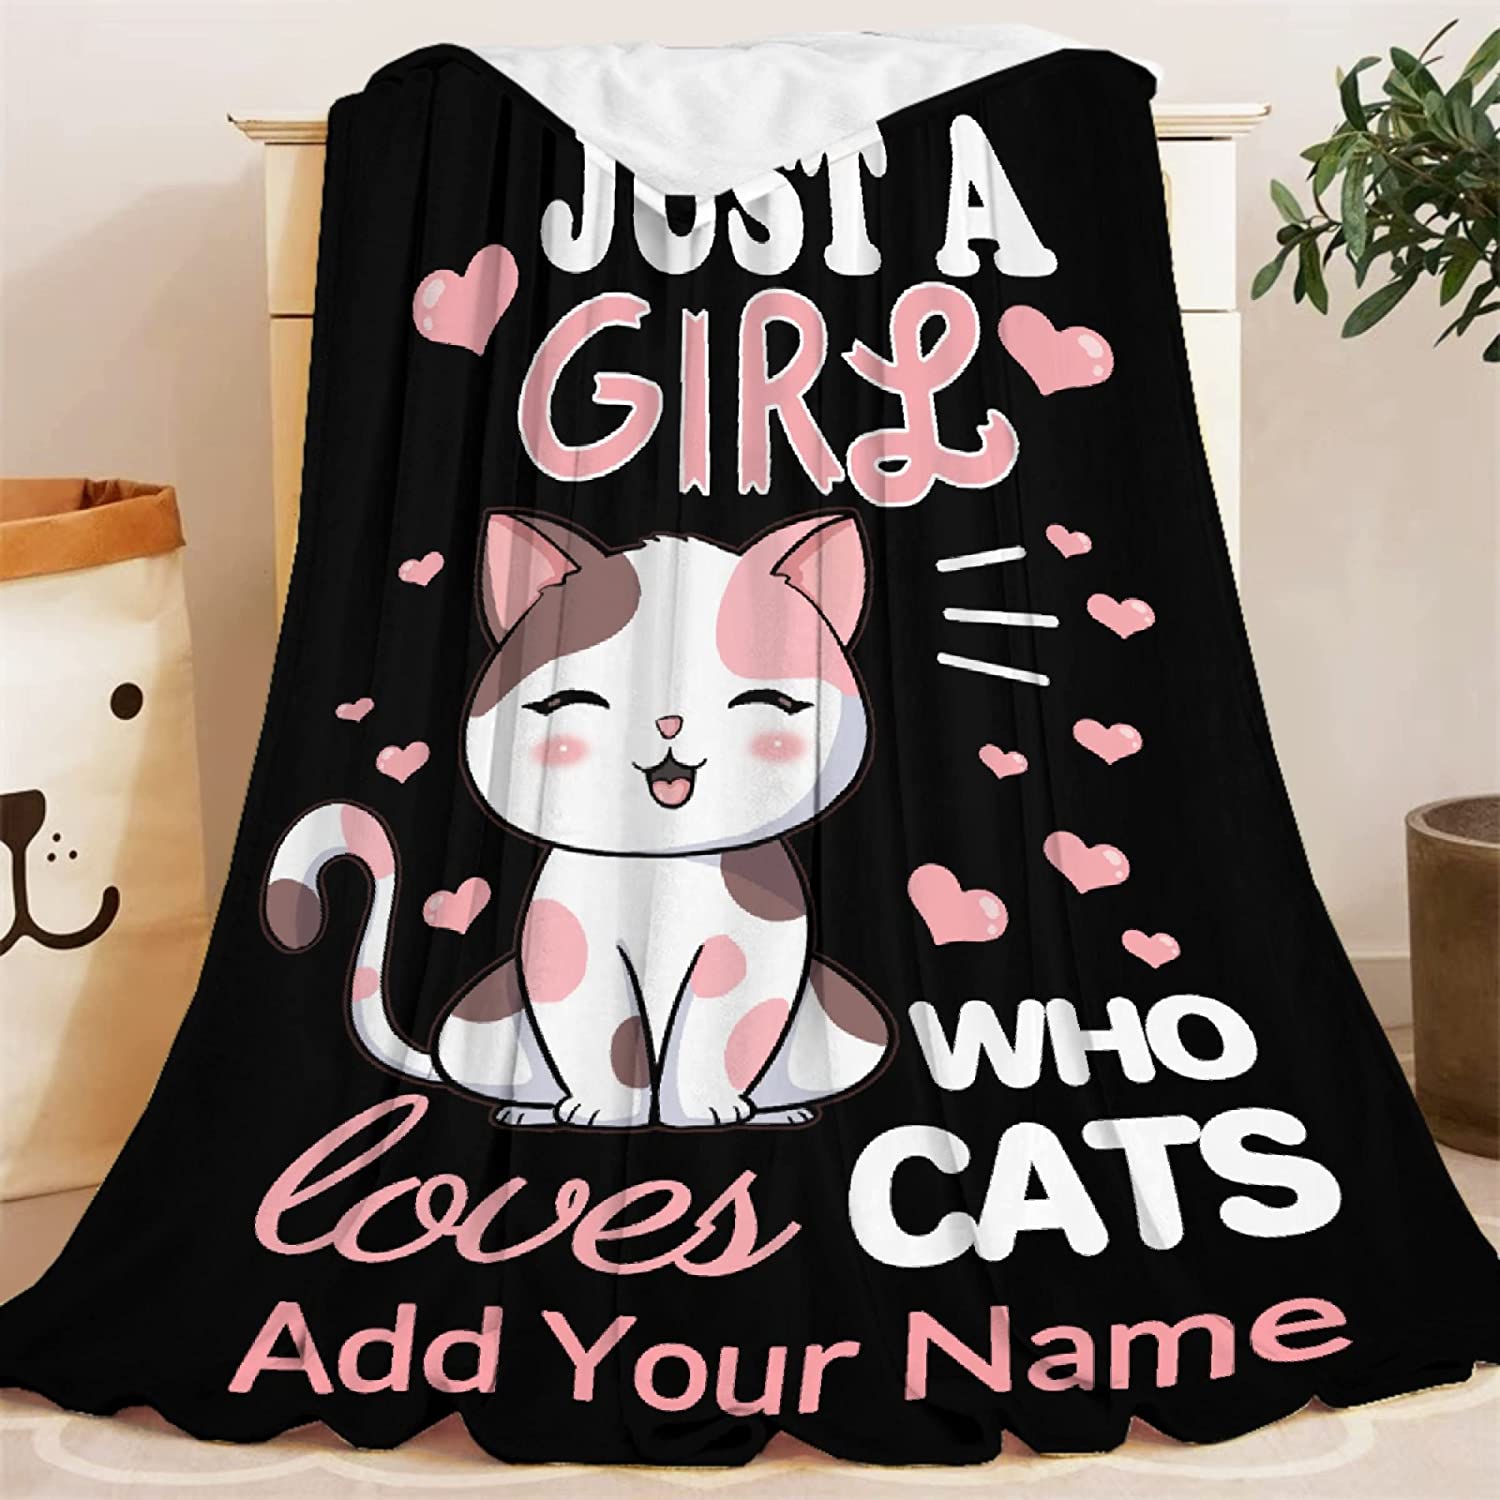  Bilibunny Cat Blanket Gifts for Cat Lovers, 40x55